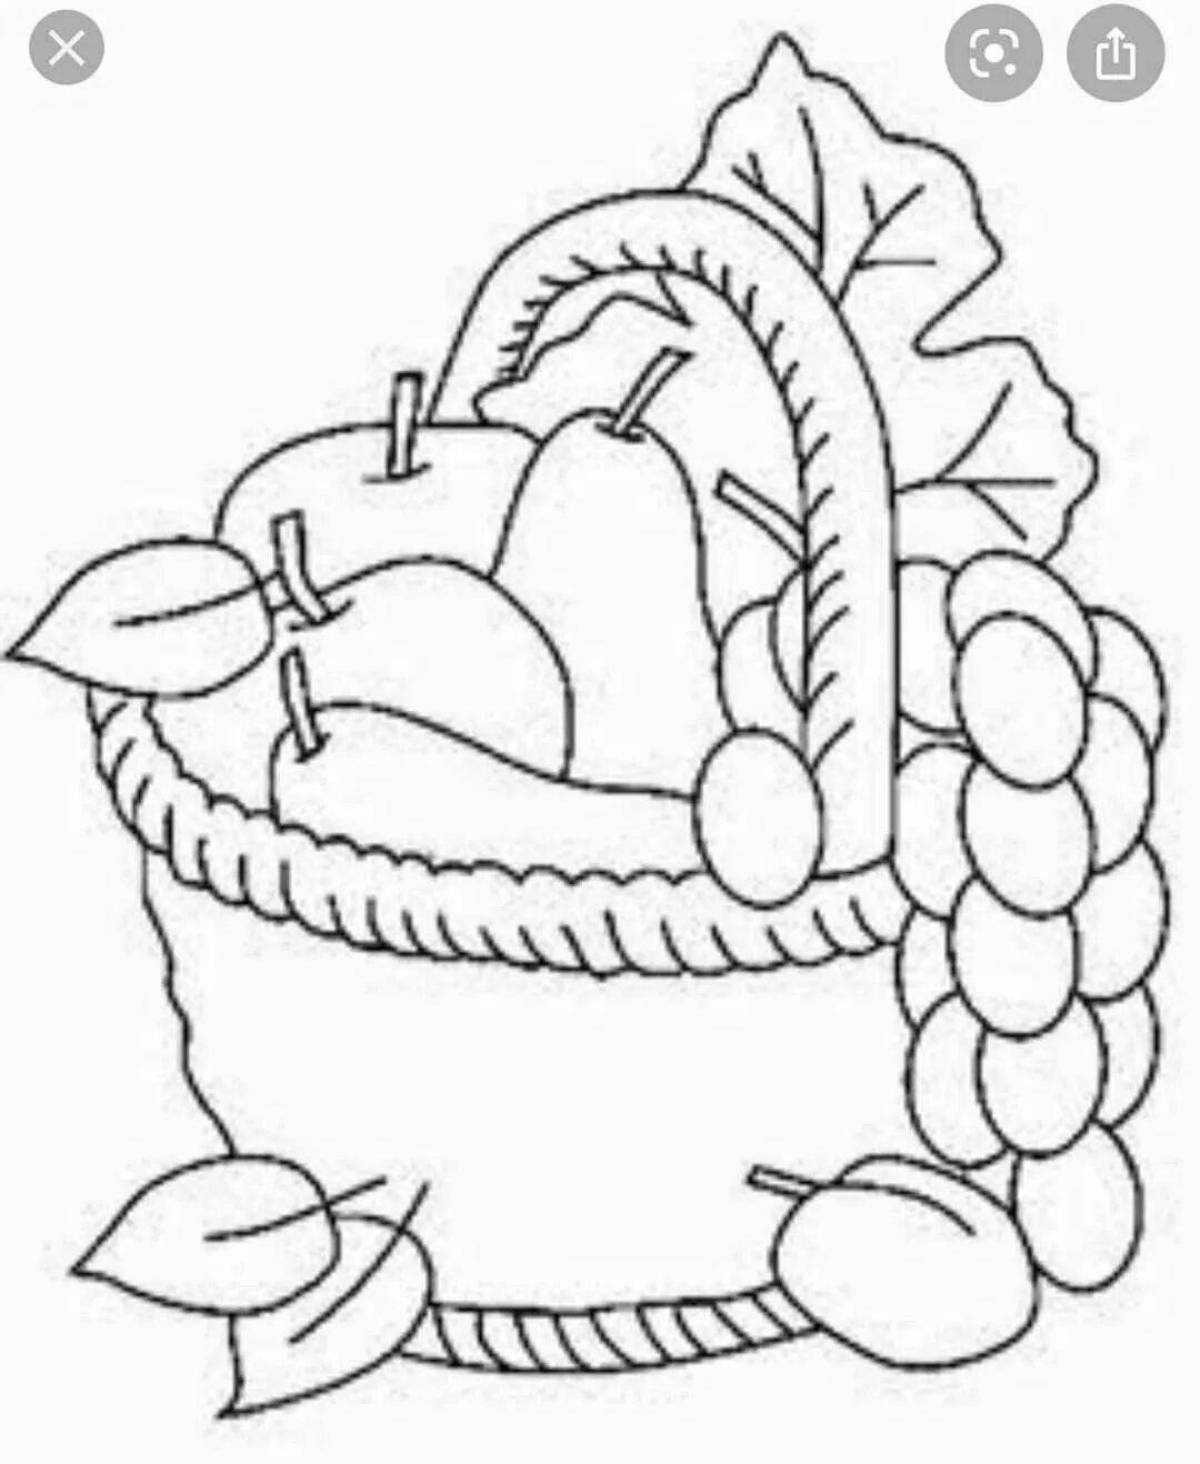 Colorful fruit basket coloring book for kids